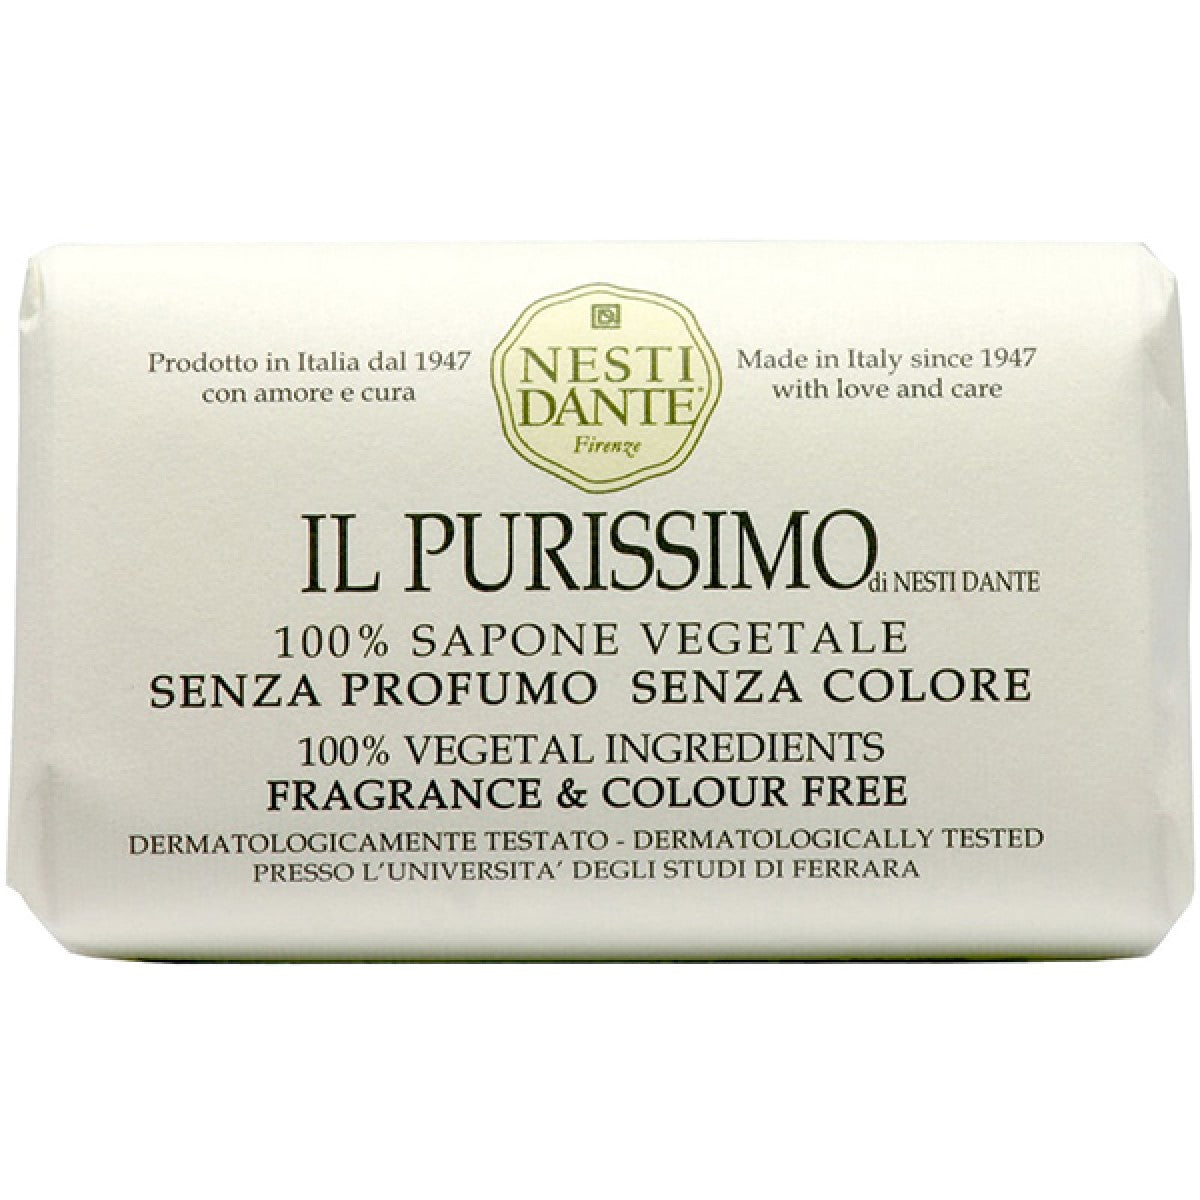 Primary Image of Il Purossimo Fragrance and Color-Free Soap